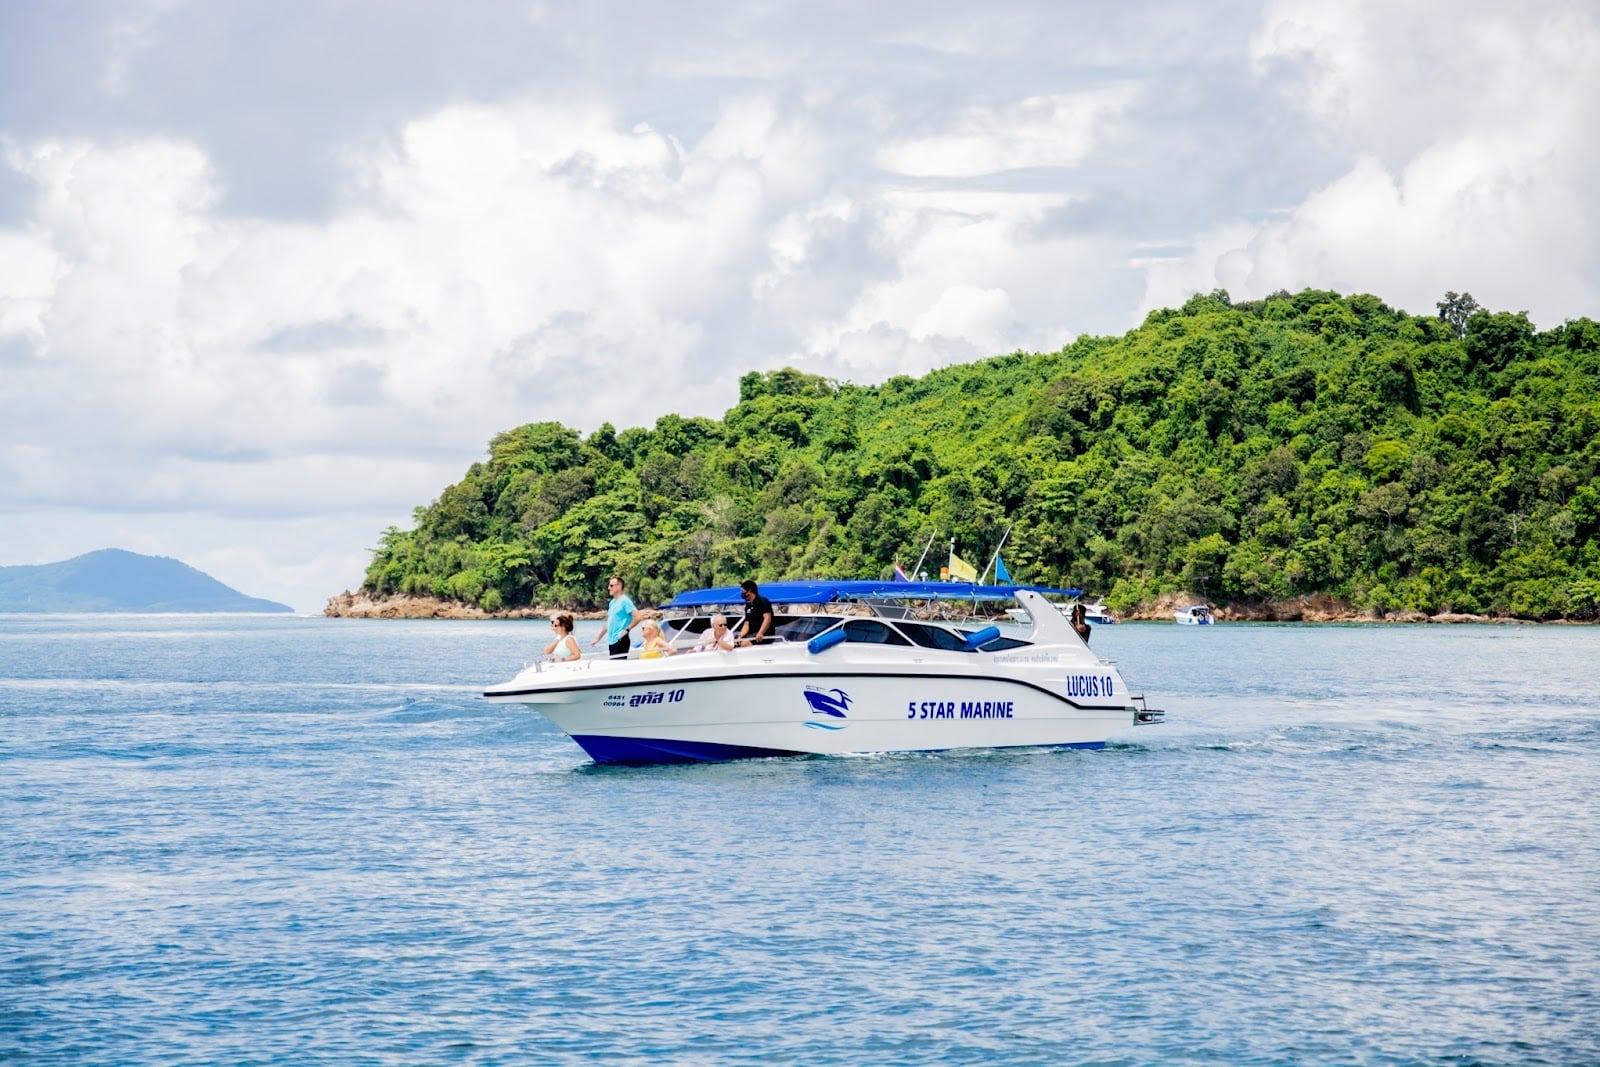 scenic view of 5 Star Marine speed boat with tourists